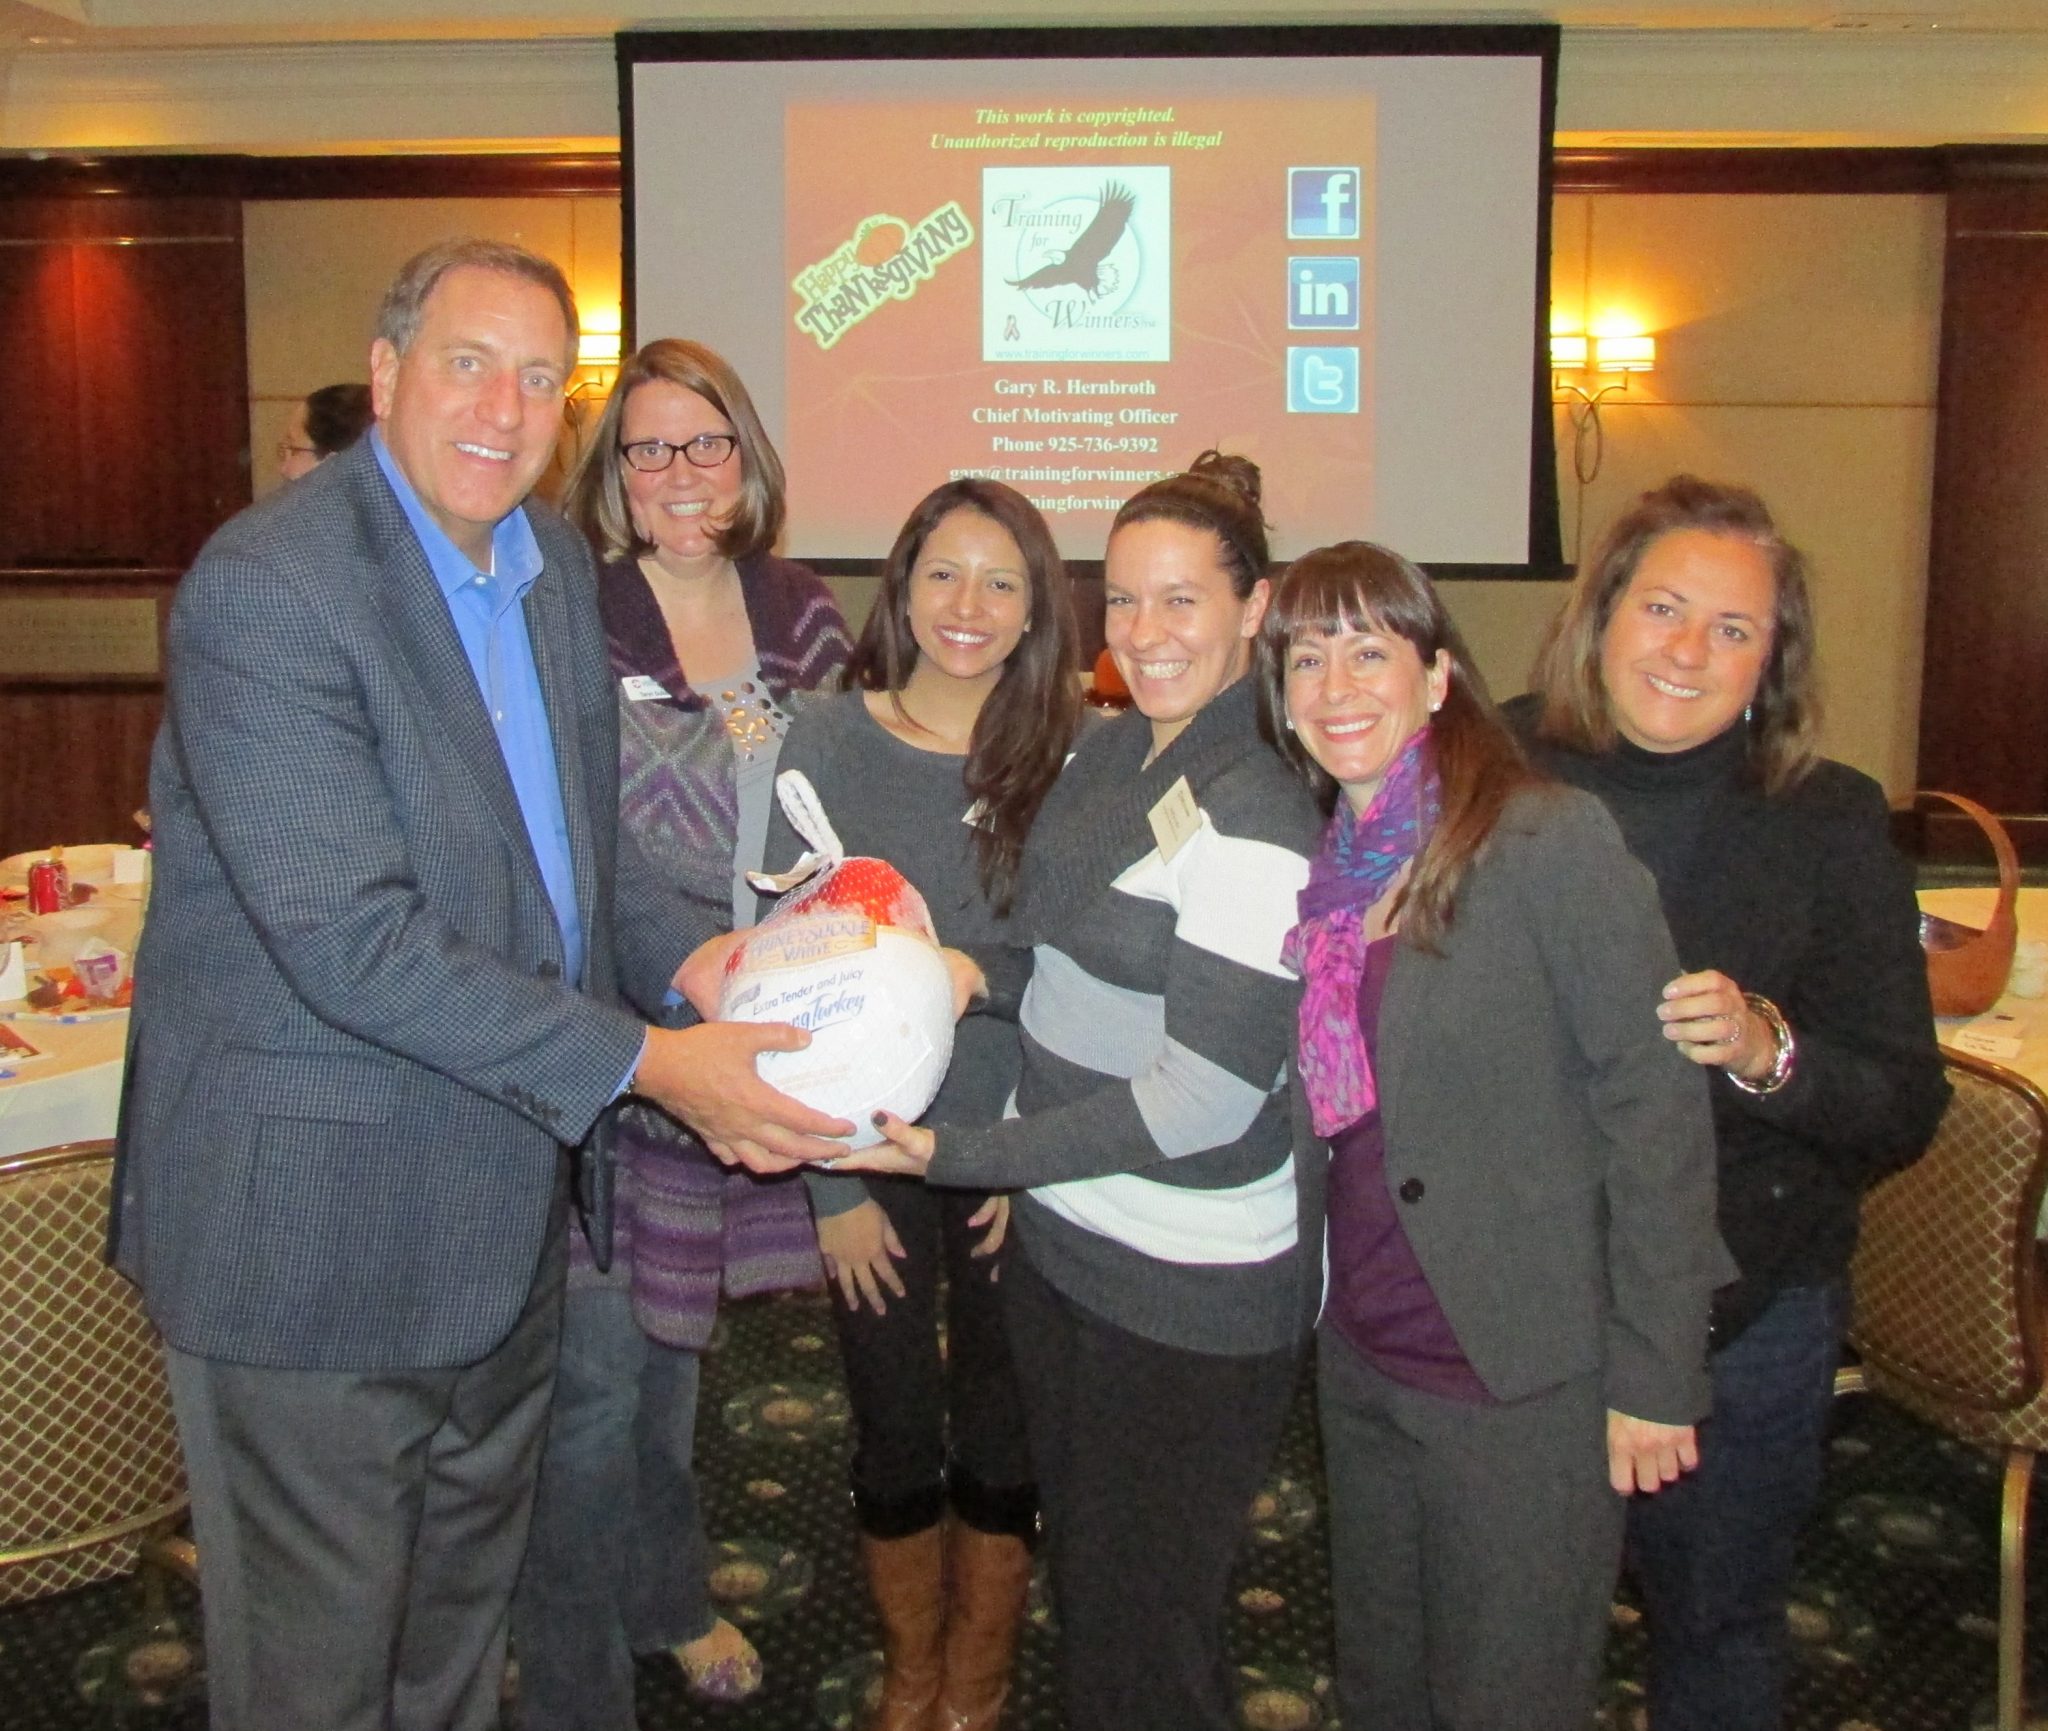 Gary’s “harvesting sales” theme for the Ypsilanti (MI) CVB and its hotel partners yielded a big Thanksgiving turkey to the lucky winner of a sales contest